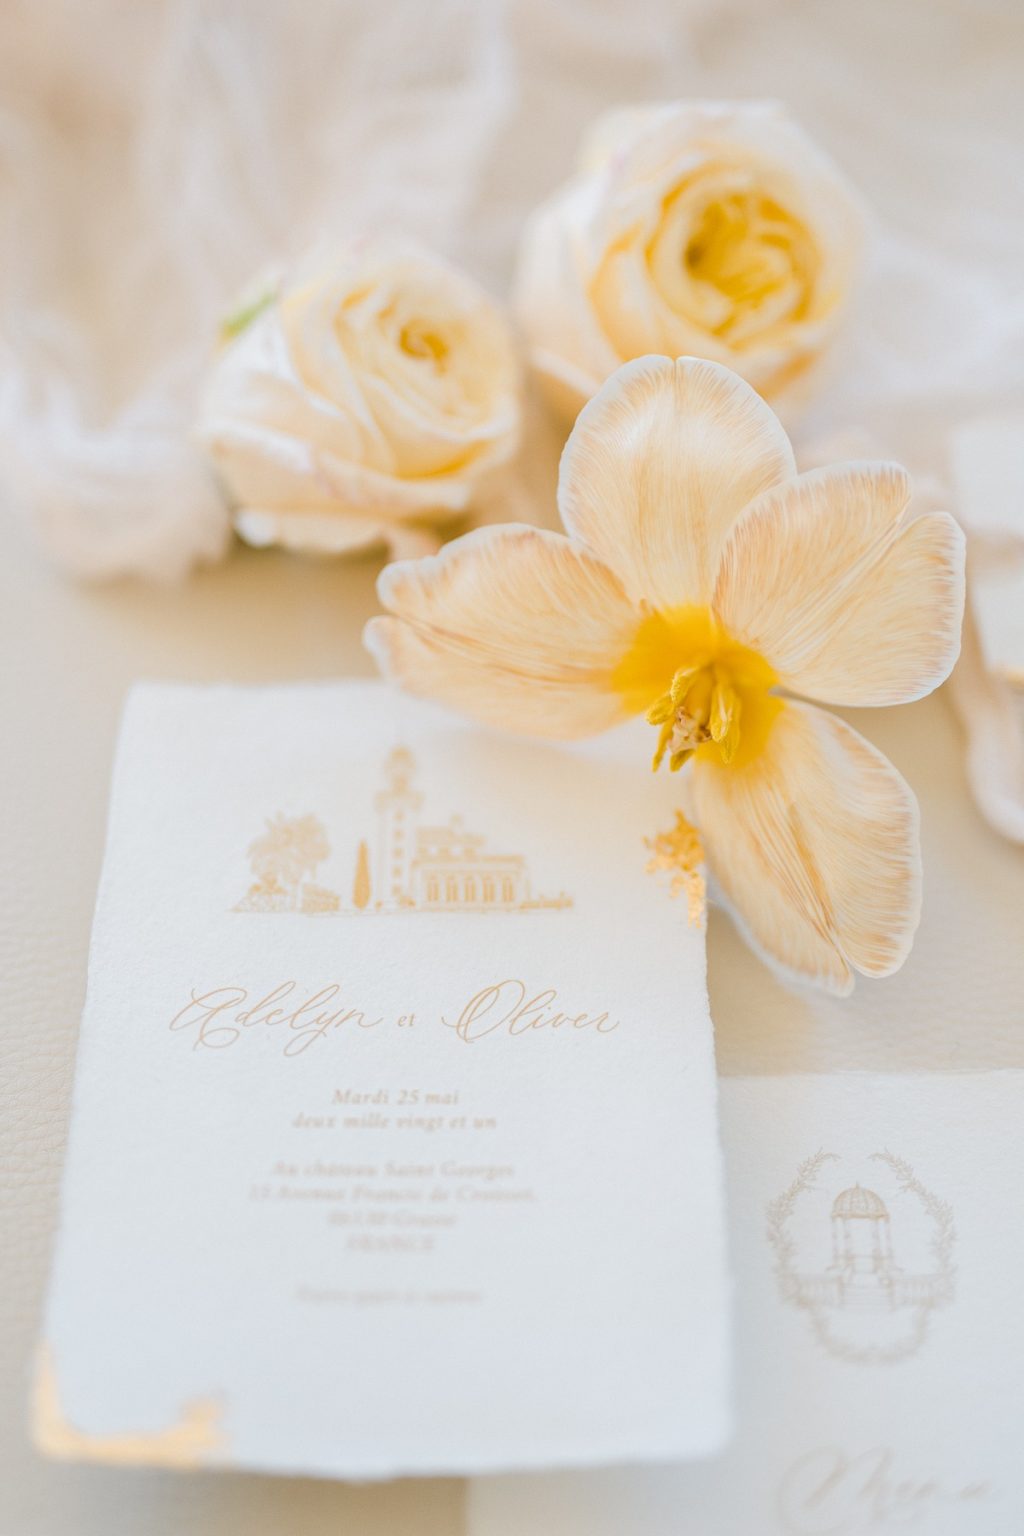 Chic Black and Gold Destination Wedding at Chateau Saint Georges, France